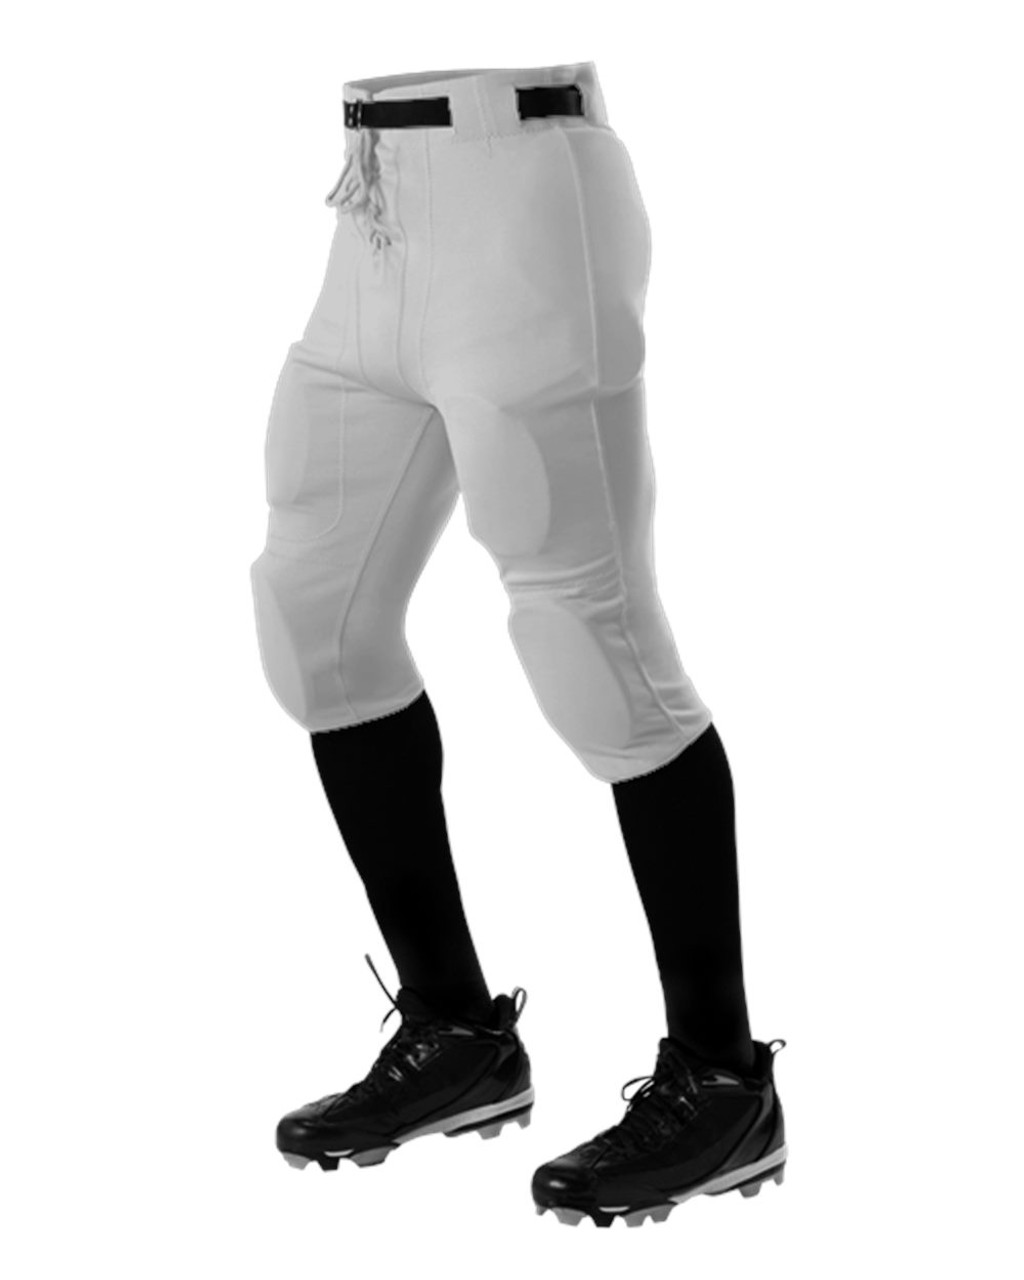 Embroidered Practice Football Pants - 610SL